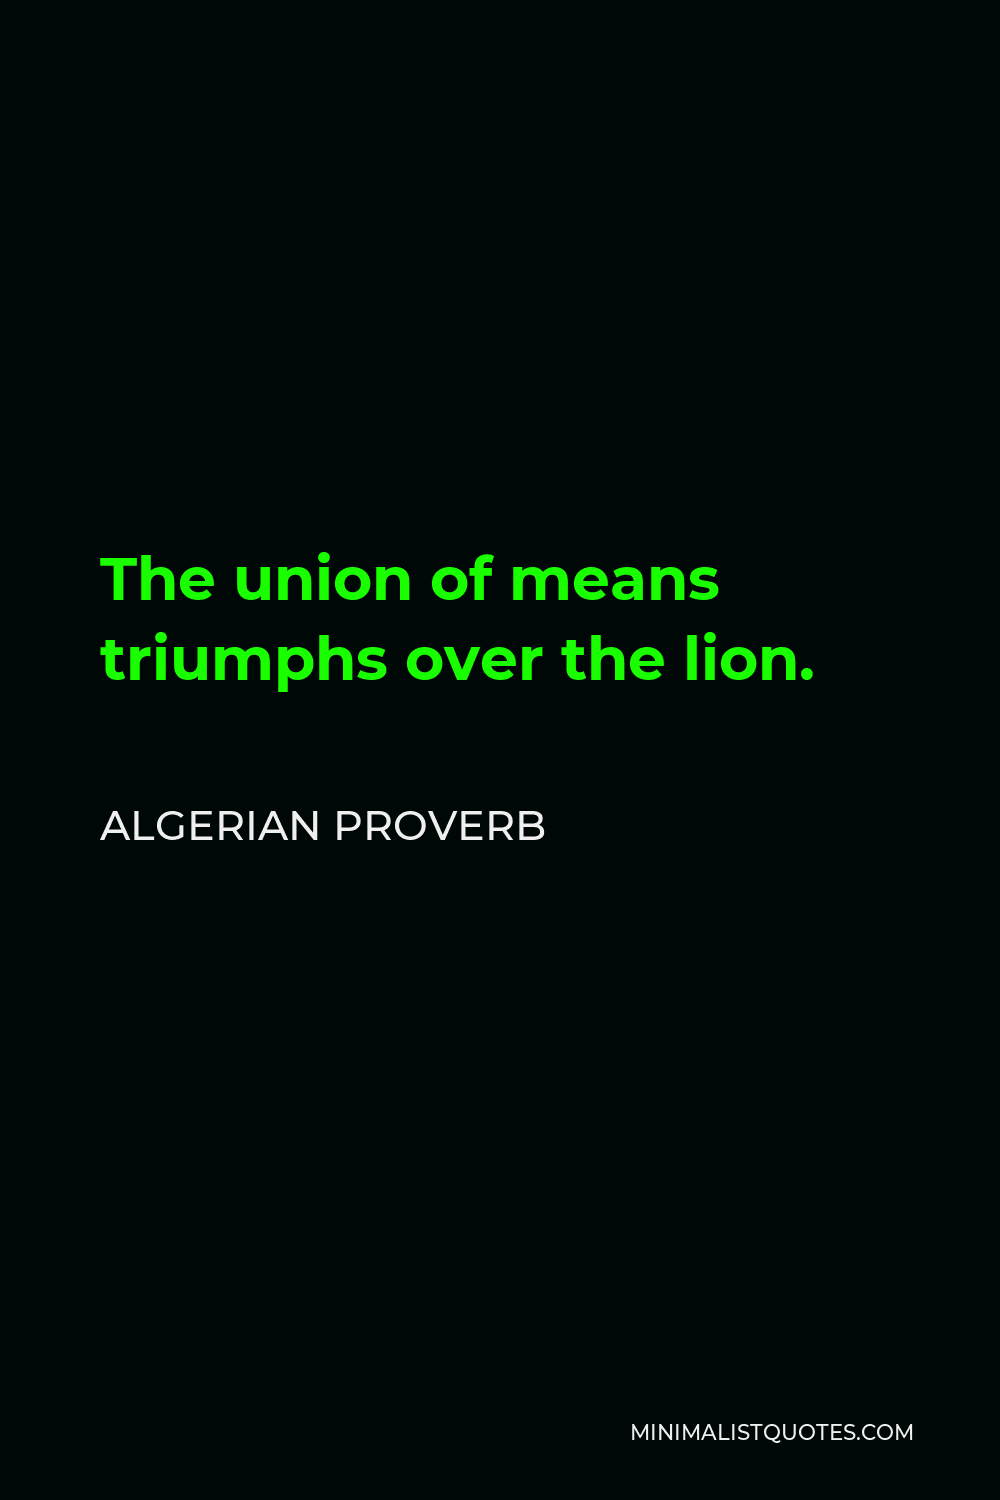 Algerian Proverb Quote - The union of means triumphs over the lion.